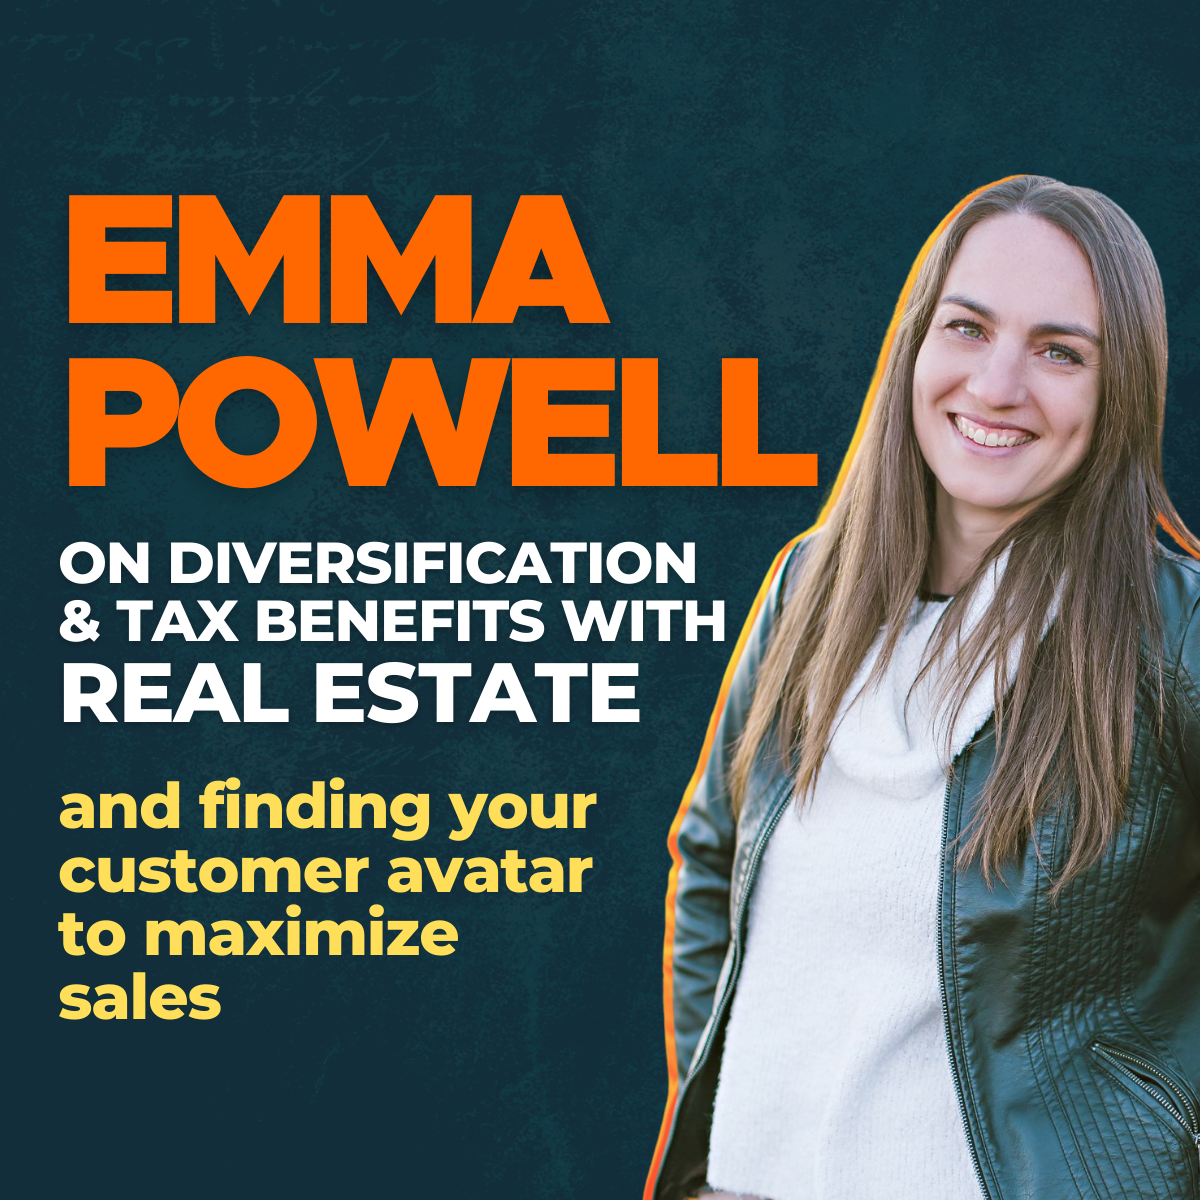 Emma Powell on diversification & tax benefits with real estate and finding your customer avatar to maximize sales